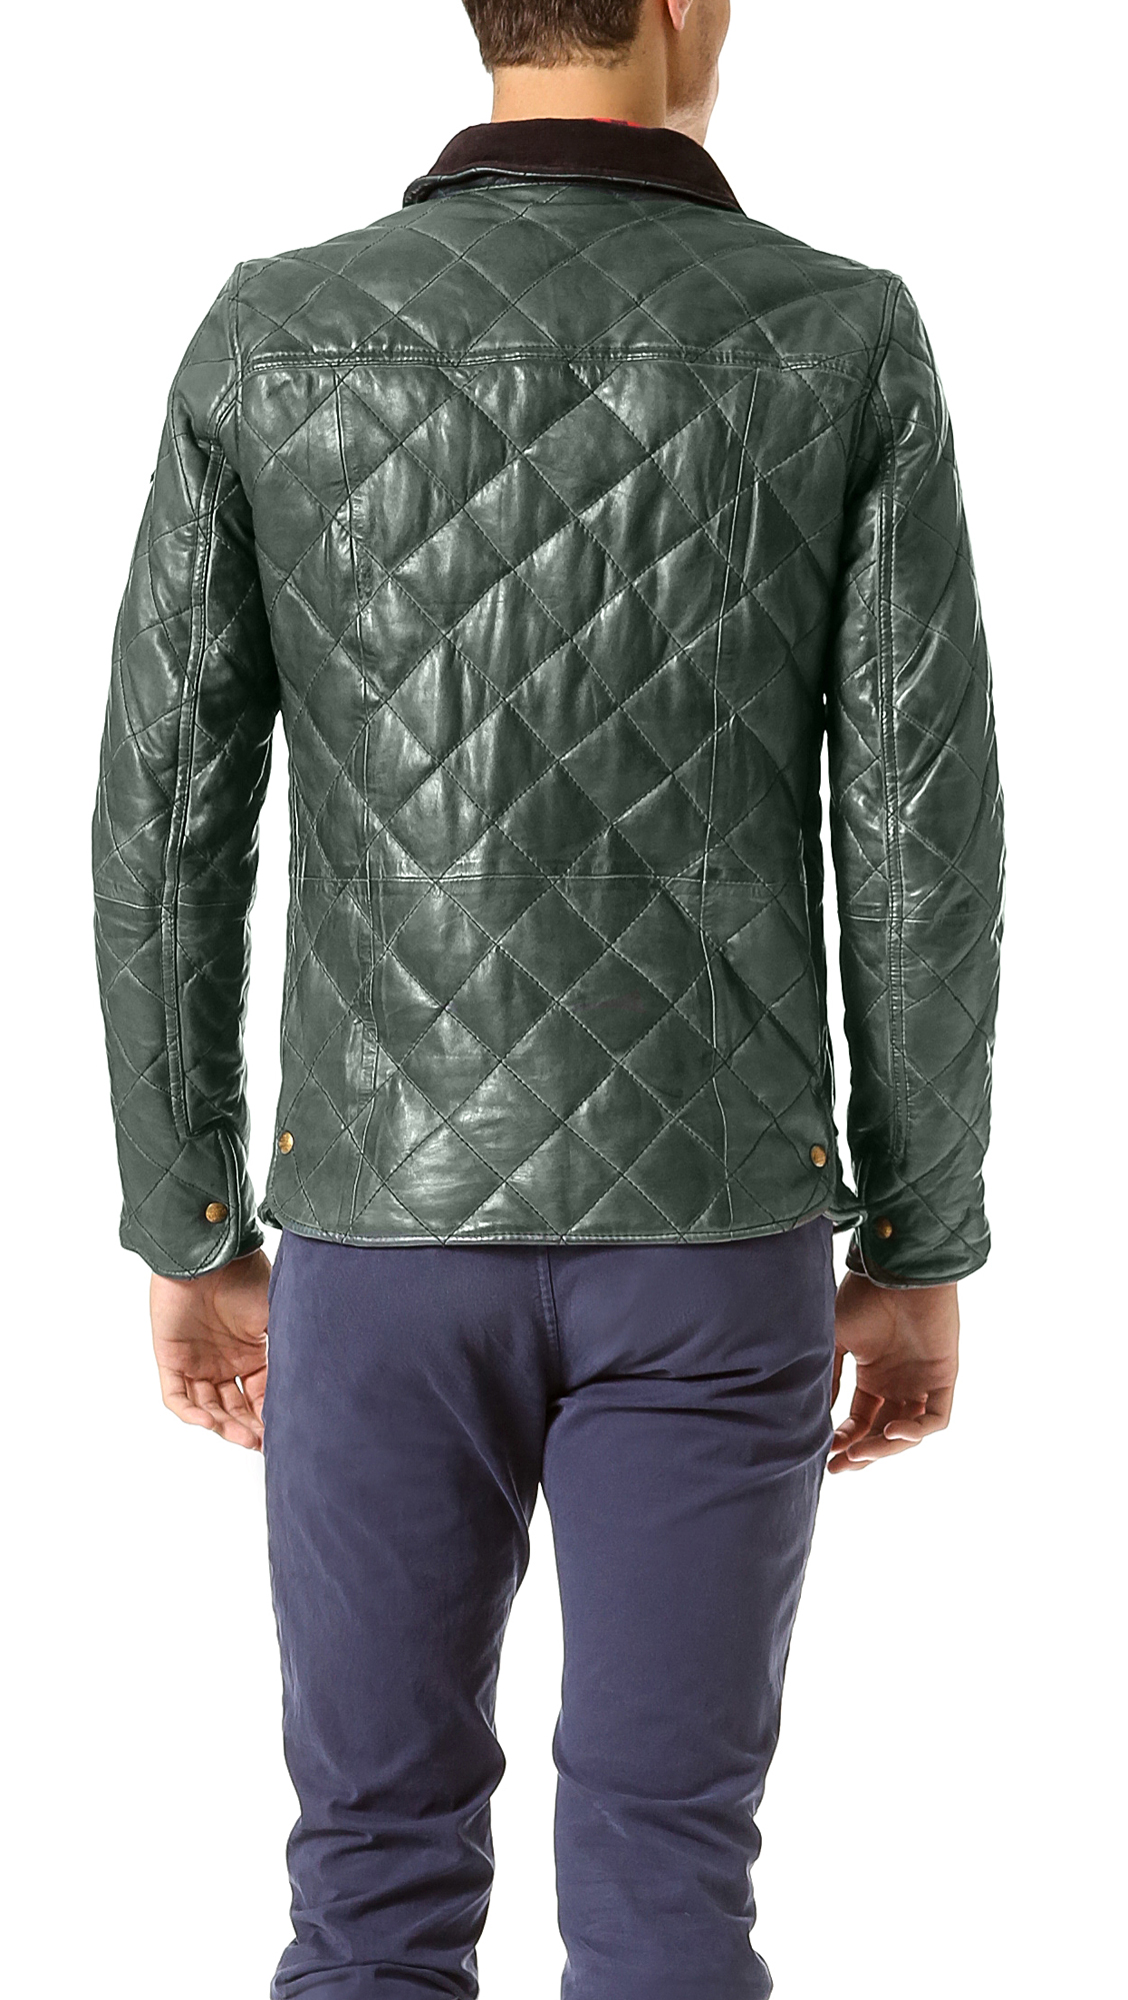 Scotch & Soda Quilted Leather Jacket in Green for Men - Lyst